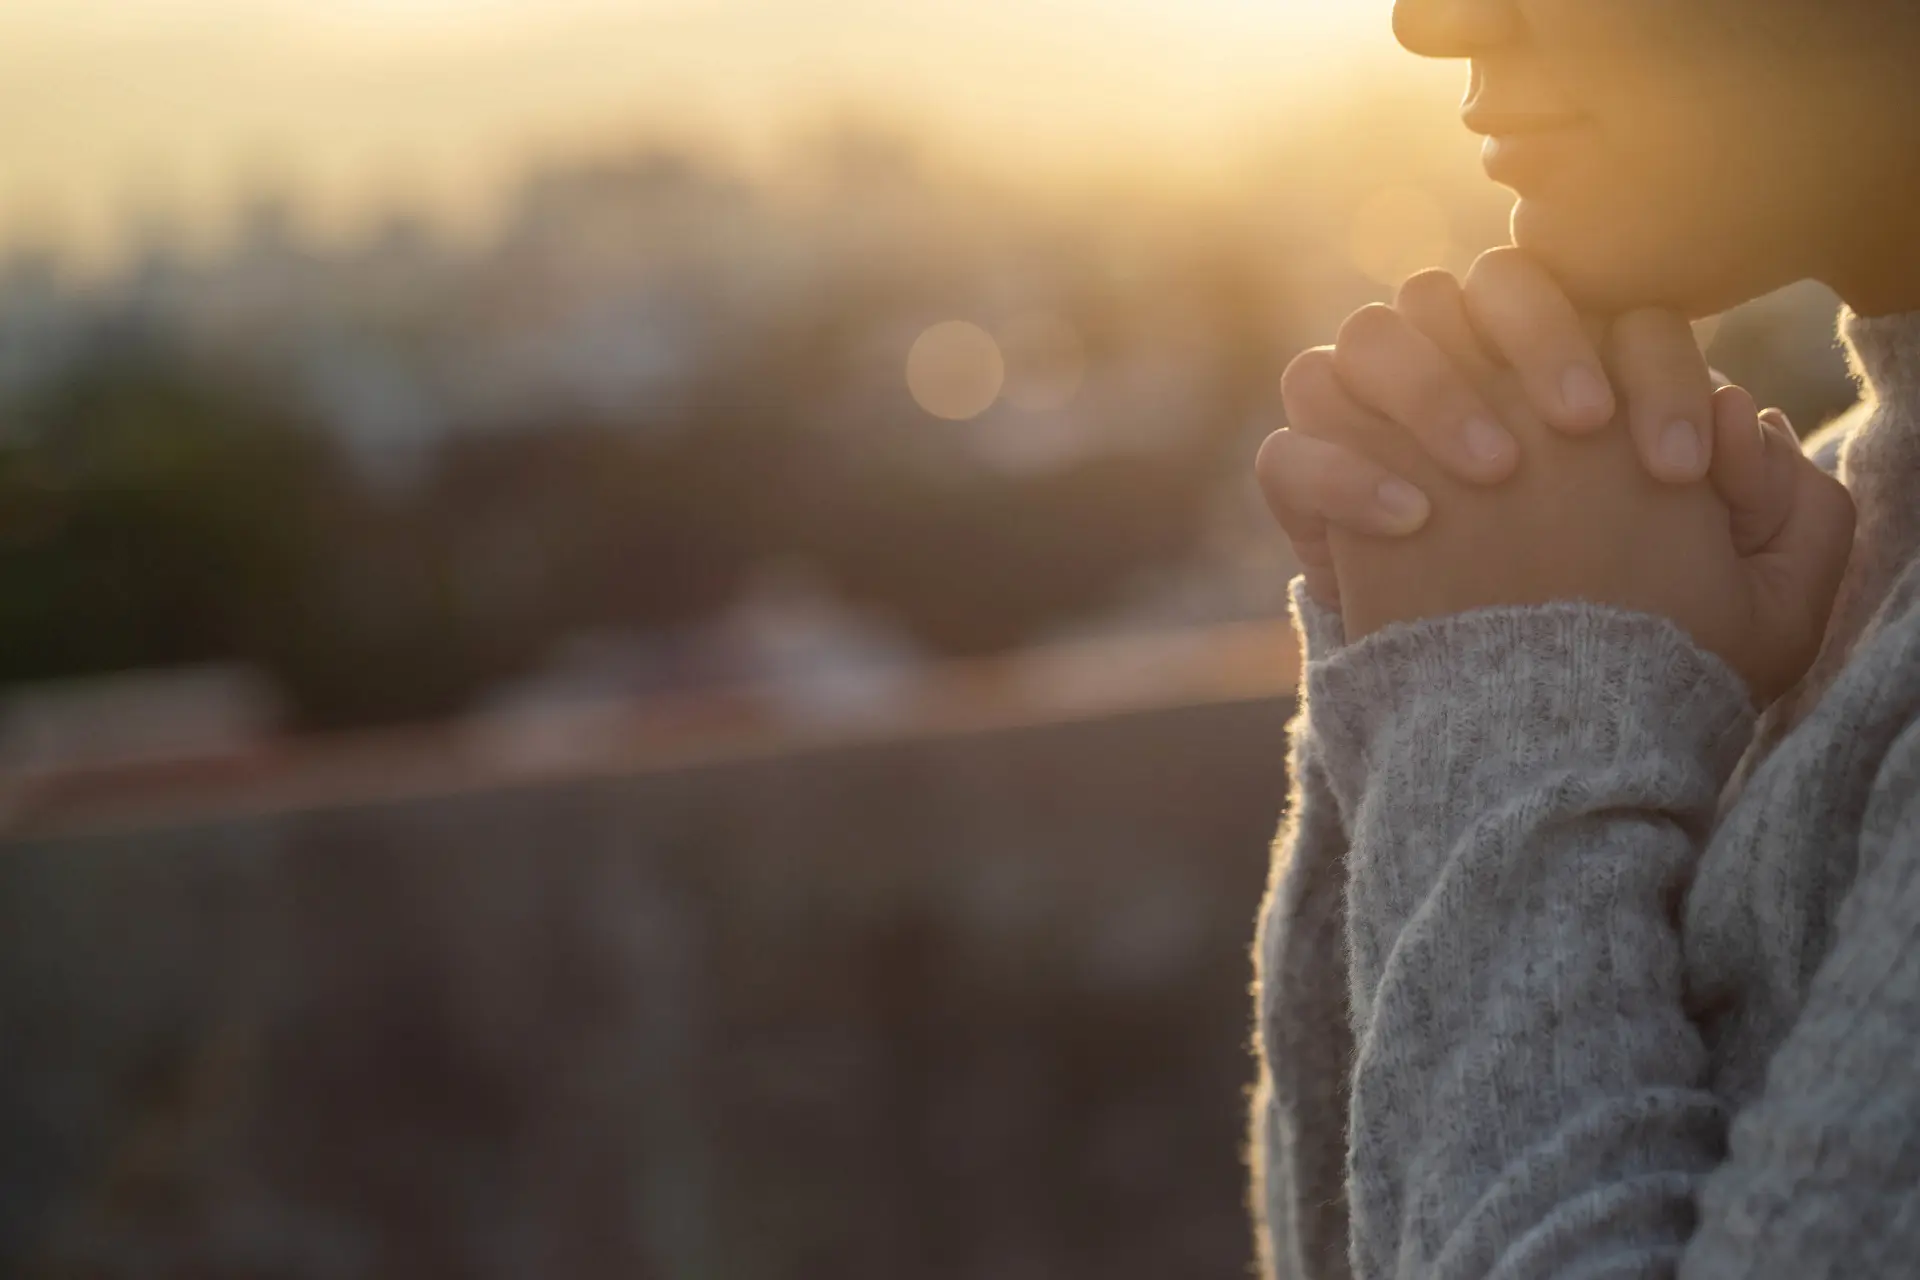 a potential survivor of sexual abuse wearing a grey sweater stands with their palms together as they contemplate their options moving forward